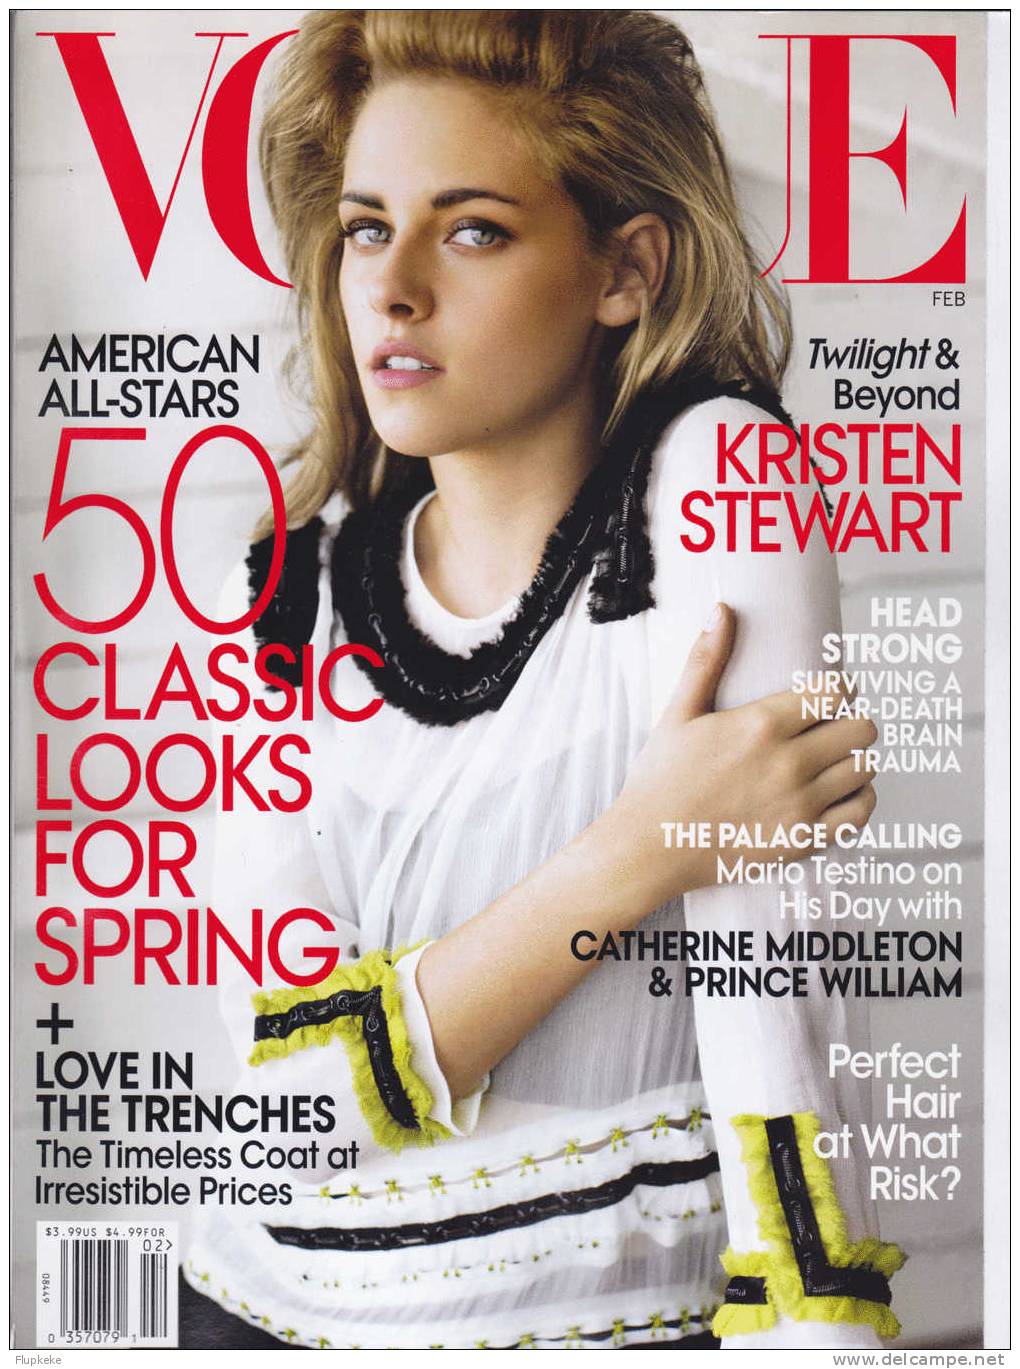 Vogue February 2011 American All-Star 50 Classic Looks For Spring Cover Kristen Stewart - Unterhaltung